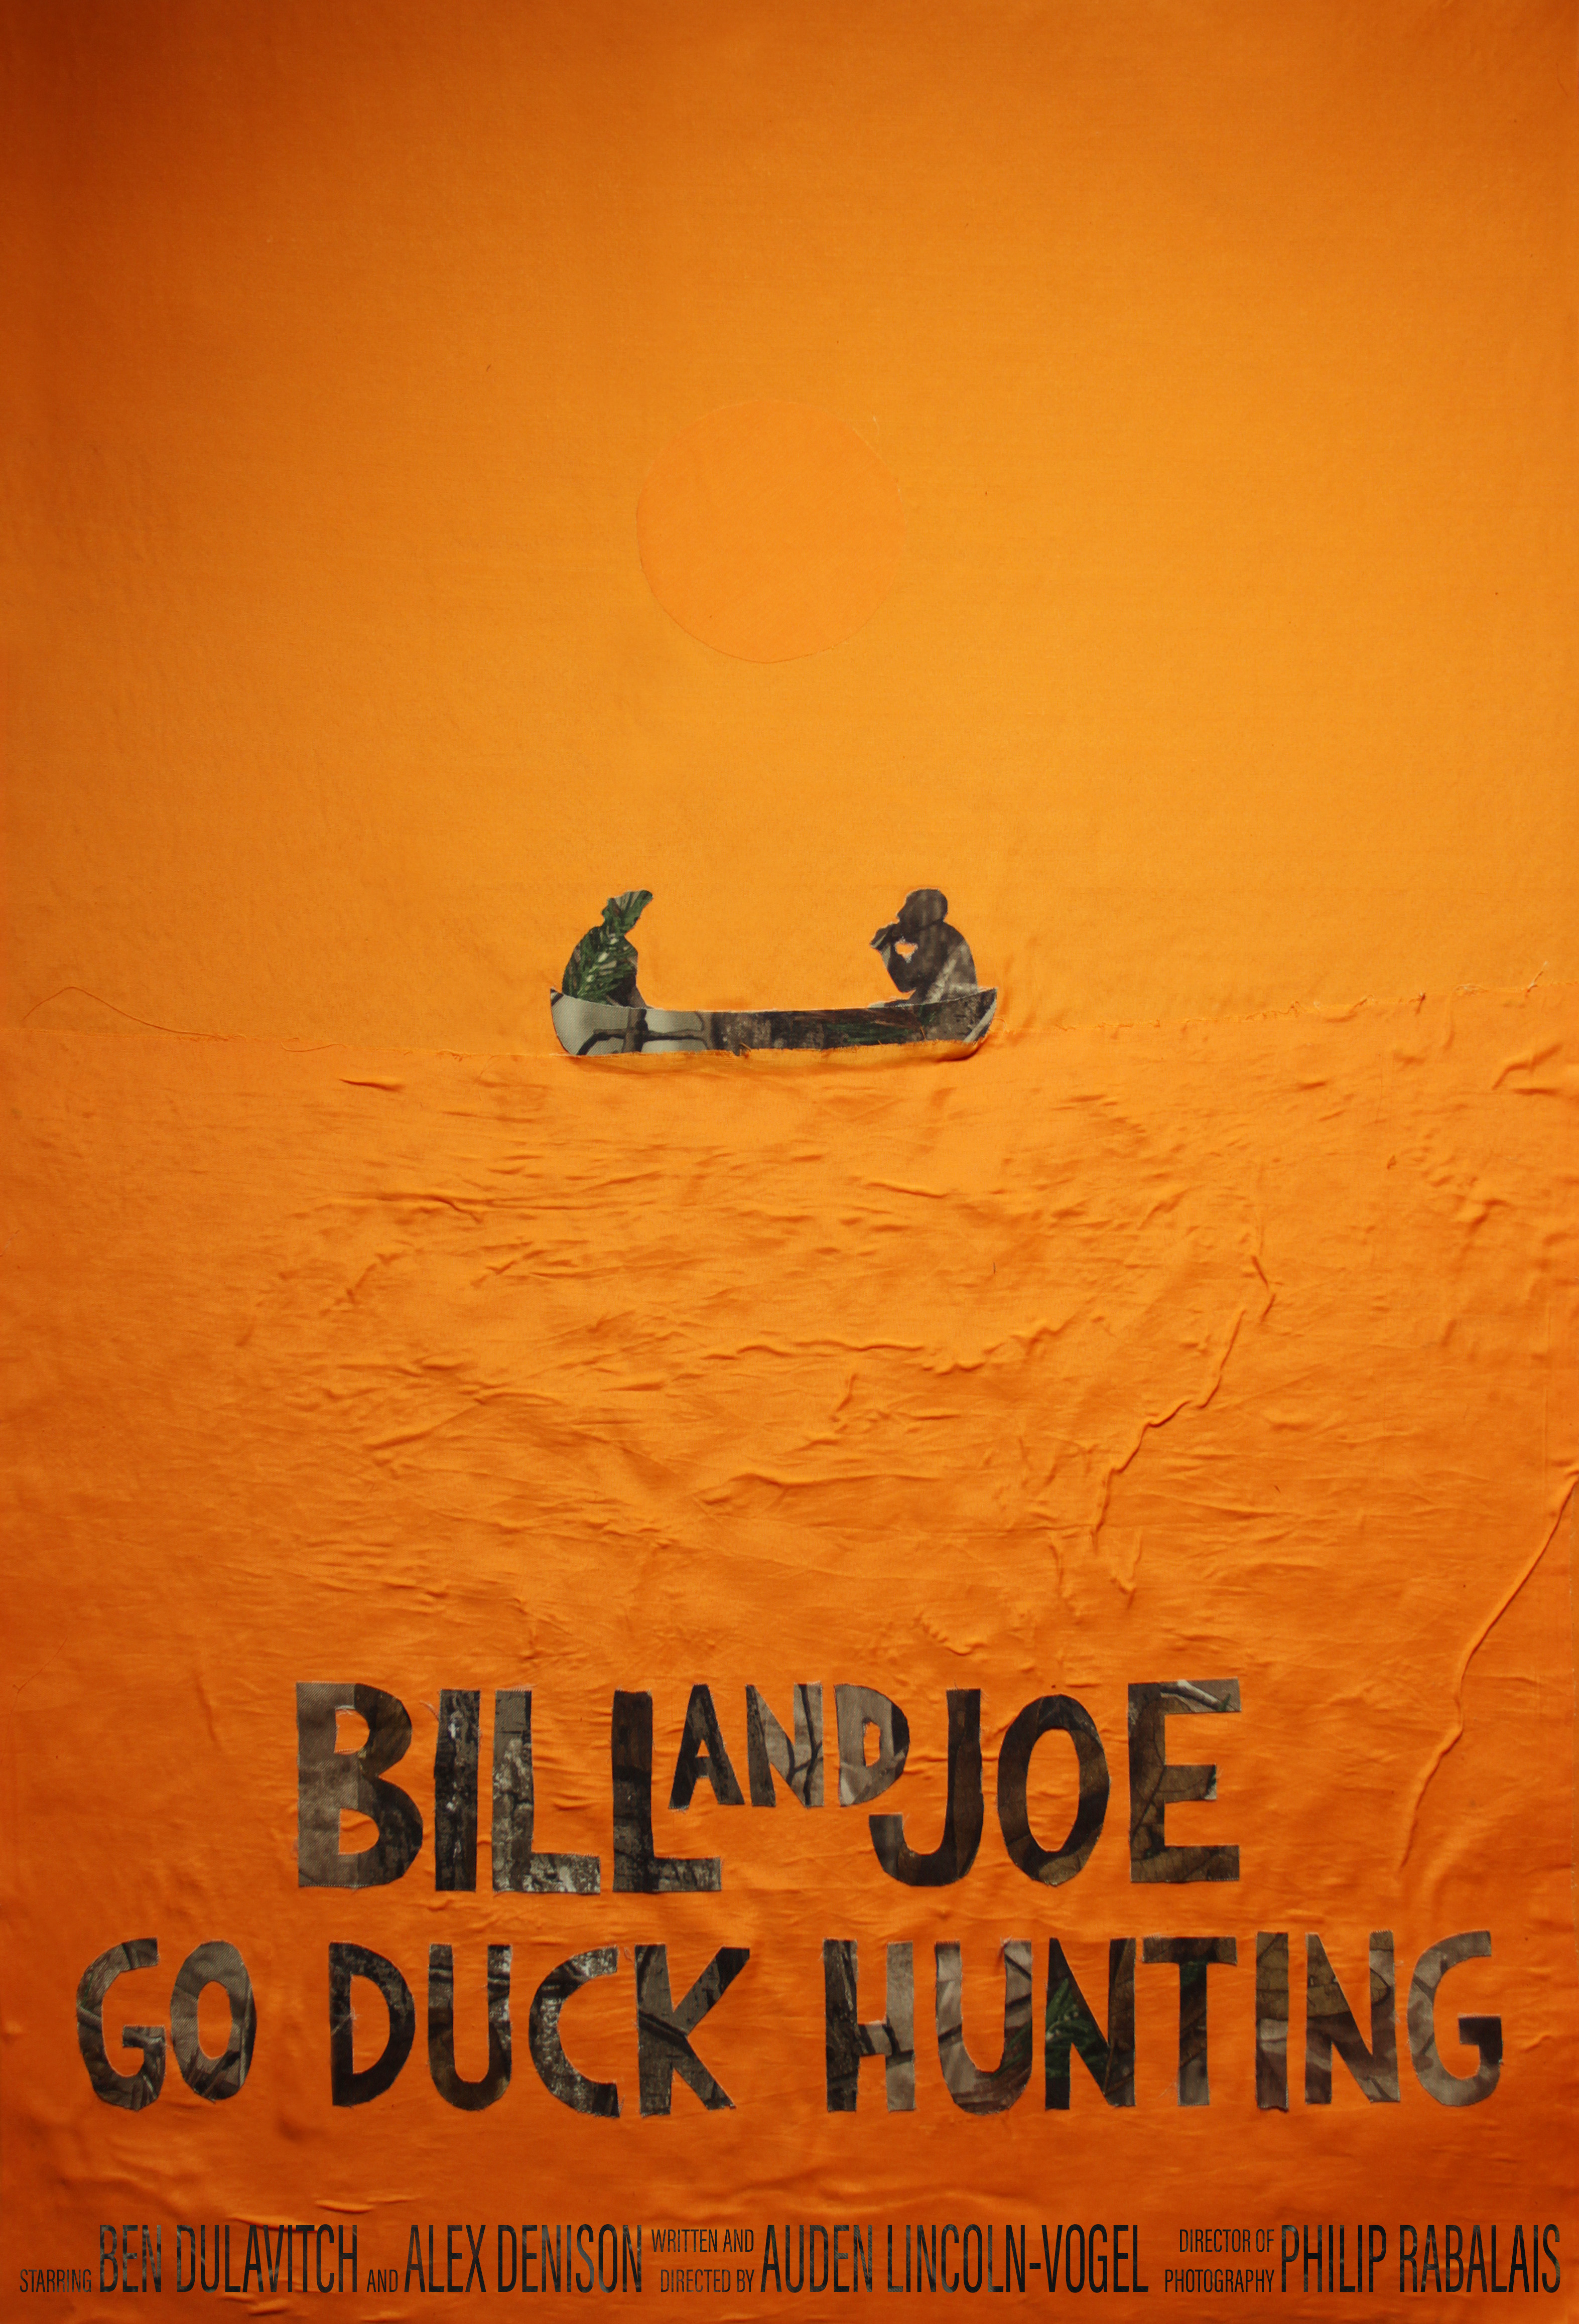 Film poster made from camo and orange fabric